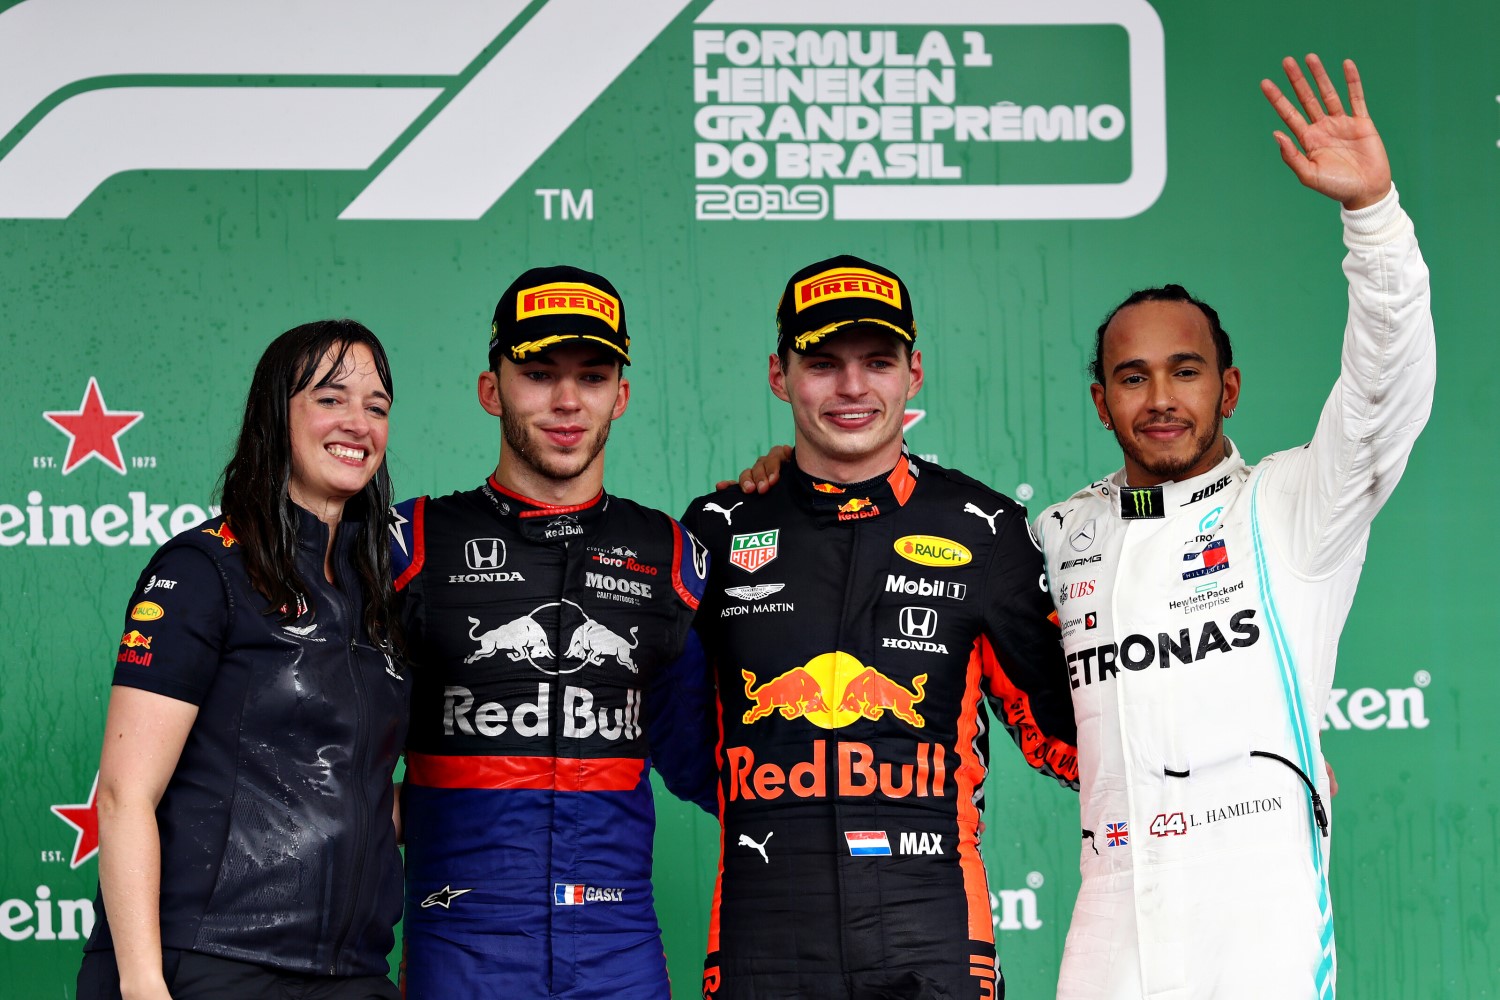 From left, Gasly, Verstappen and 7th place Hamilton